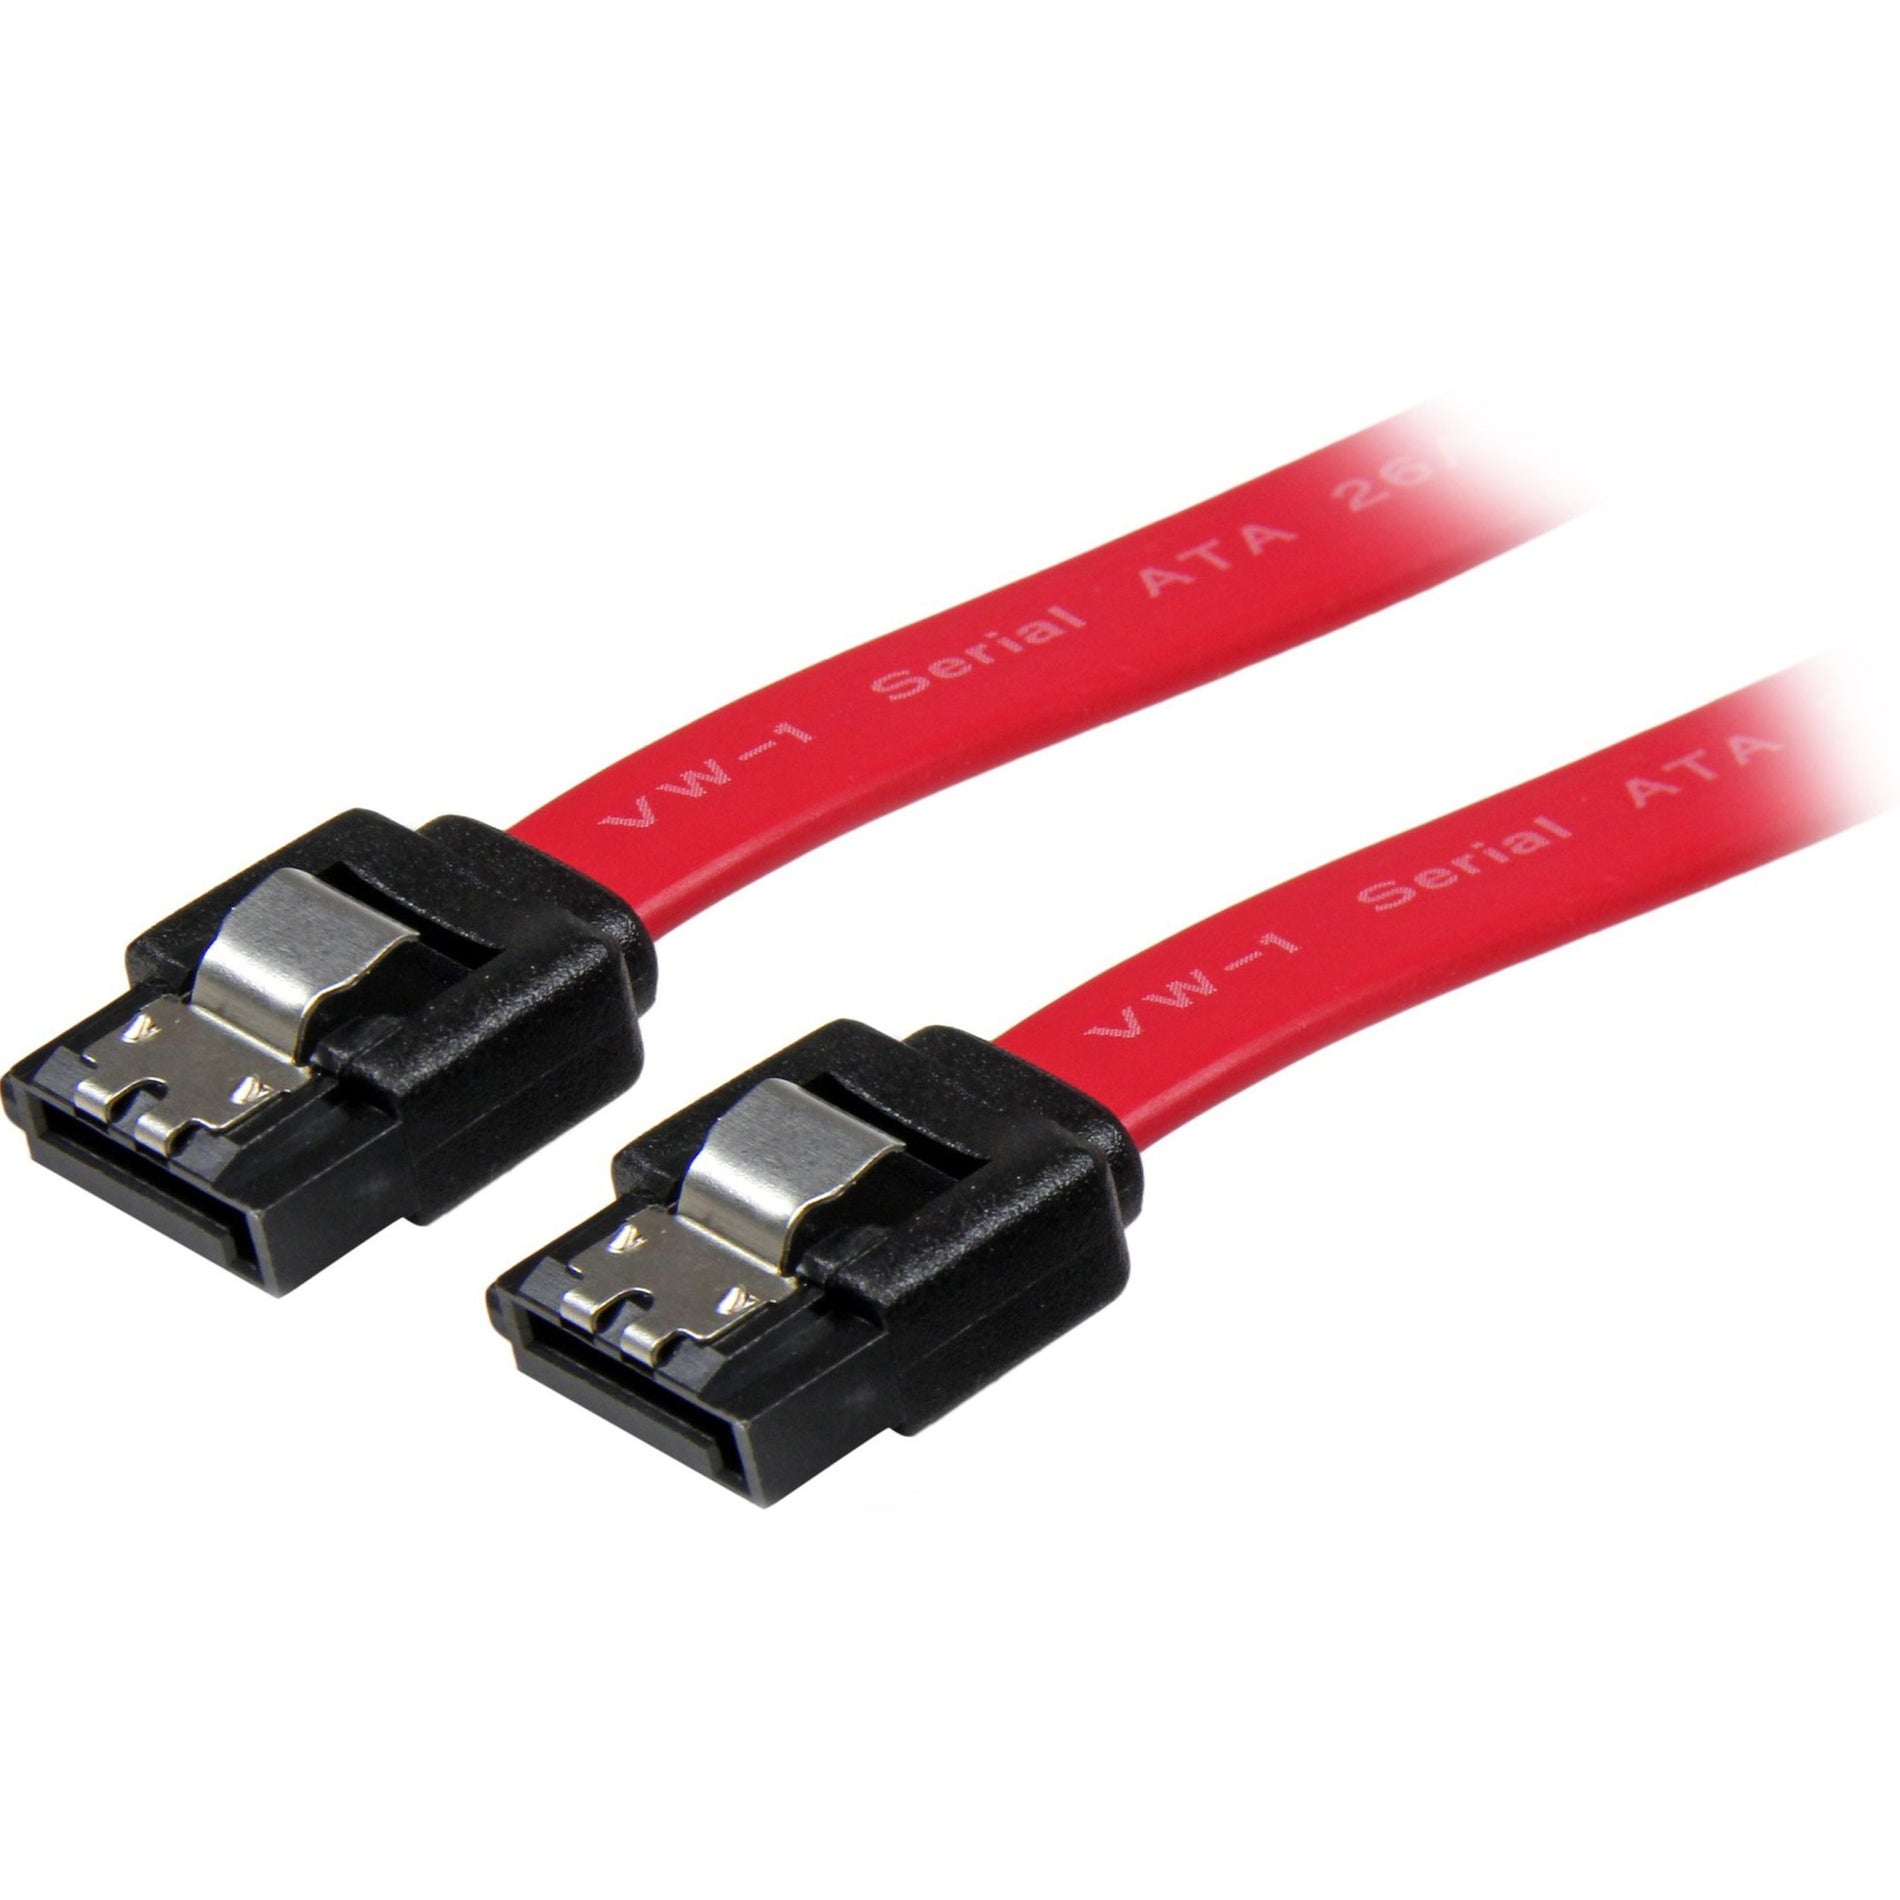 StarTech.com LSATA18 Latching SATA Cable, 1.50 ft, 6 Gbit/s Data Transfer Rate